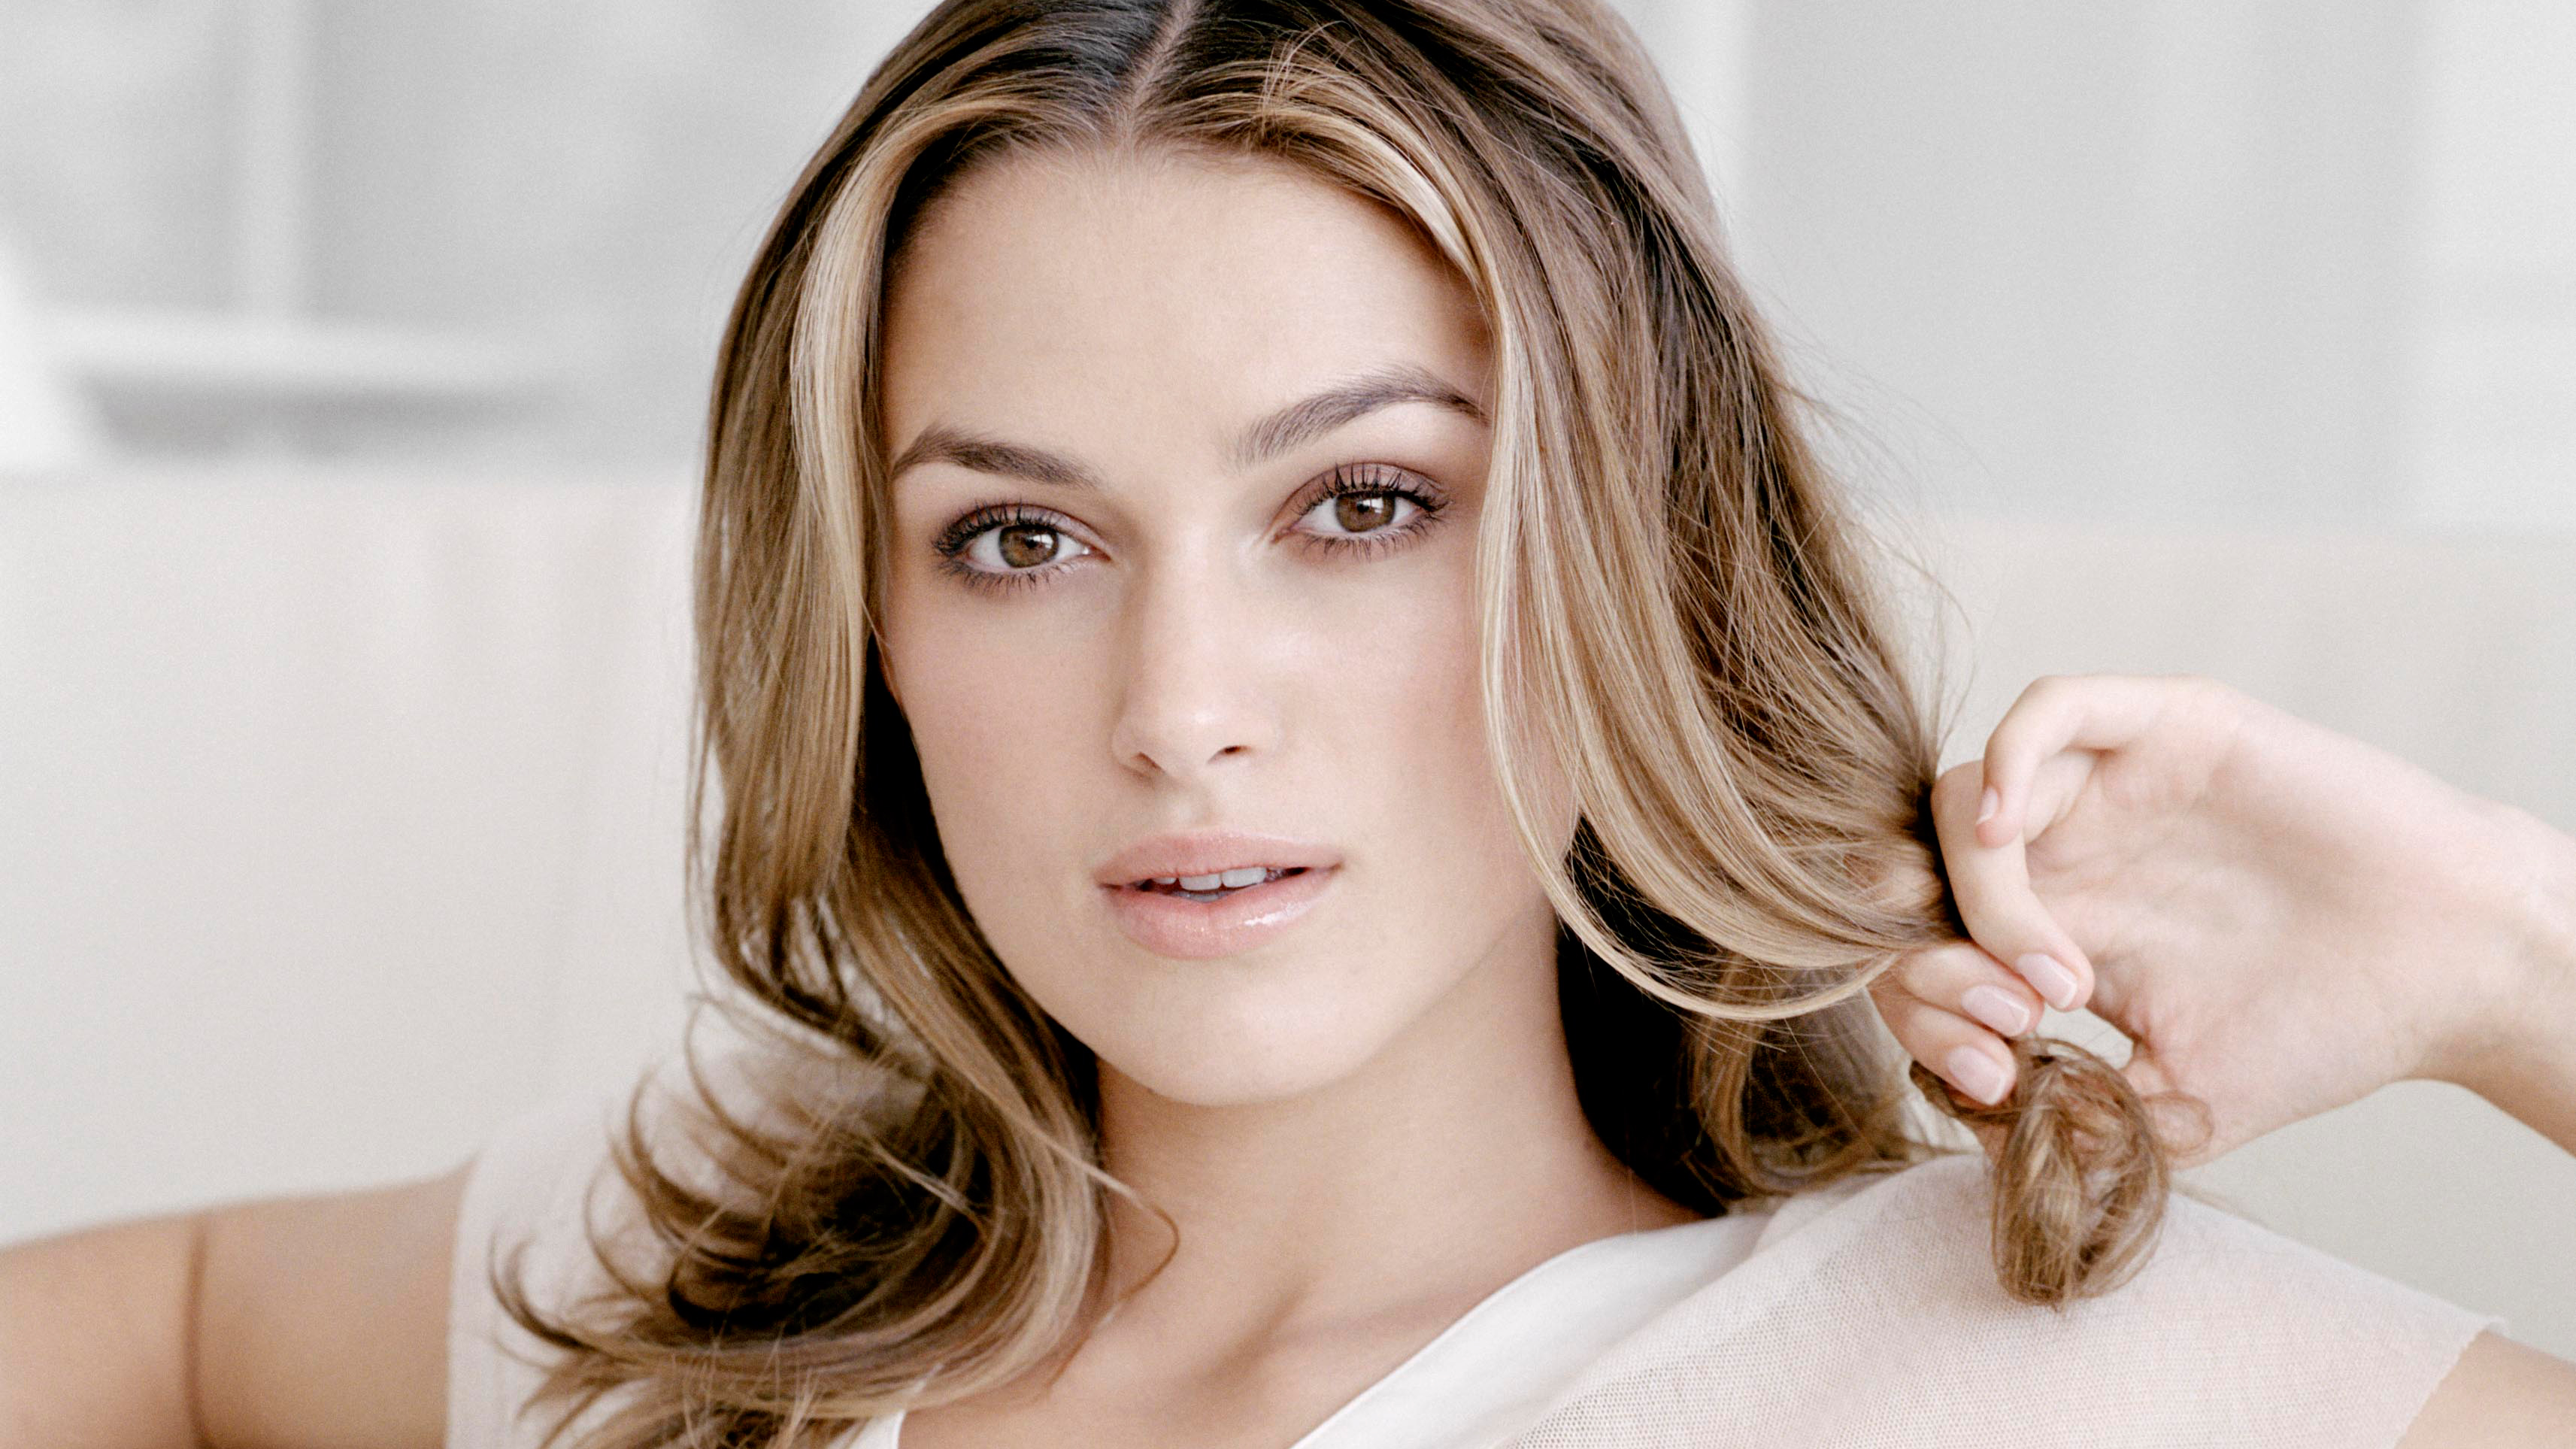 keira knightley hd wallpapers,hair,face,blond,hairstyle,eyebrow